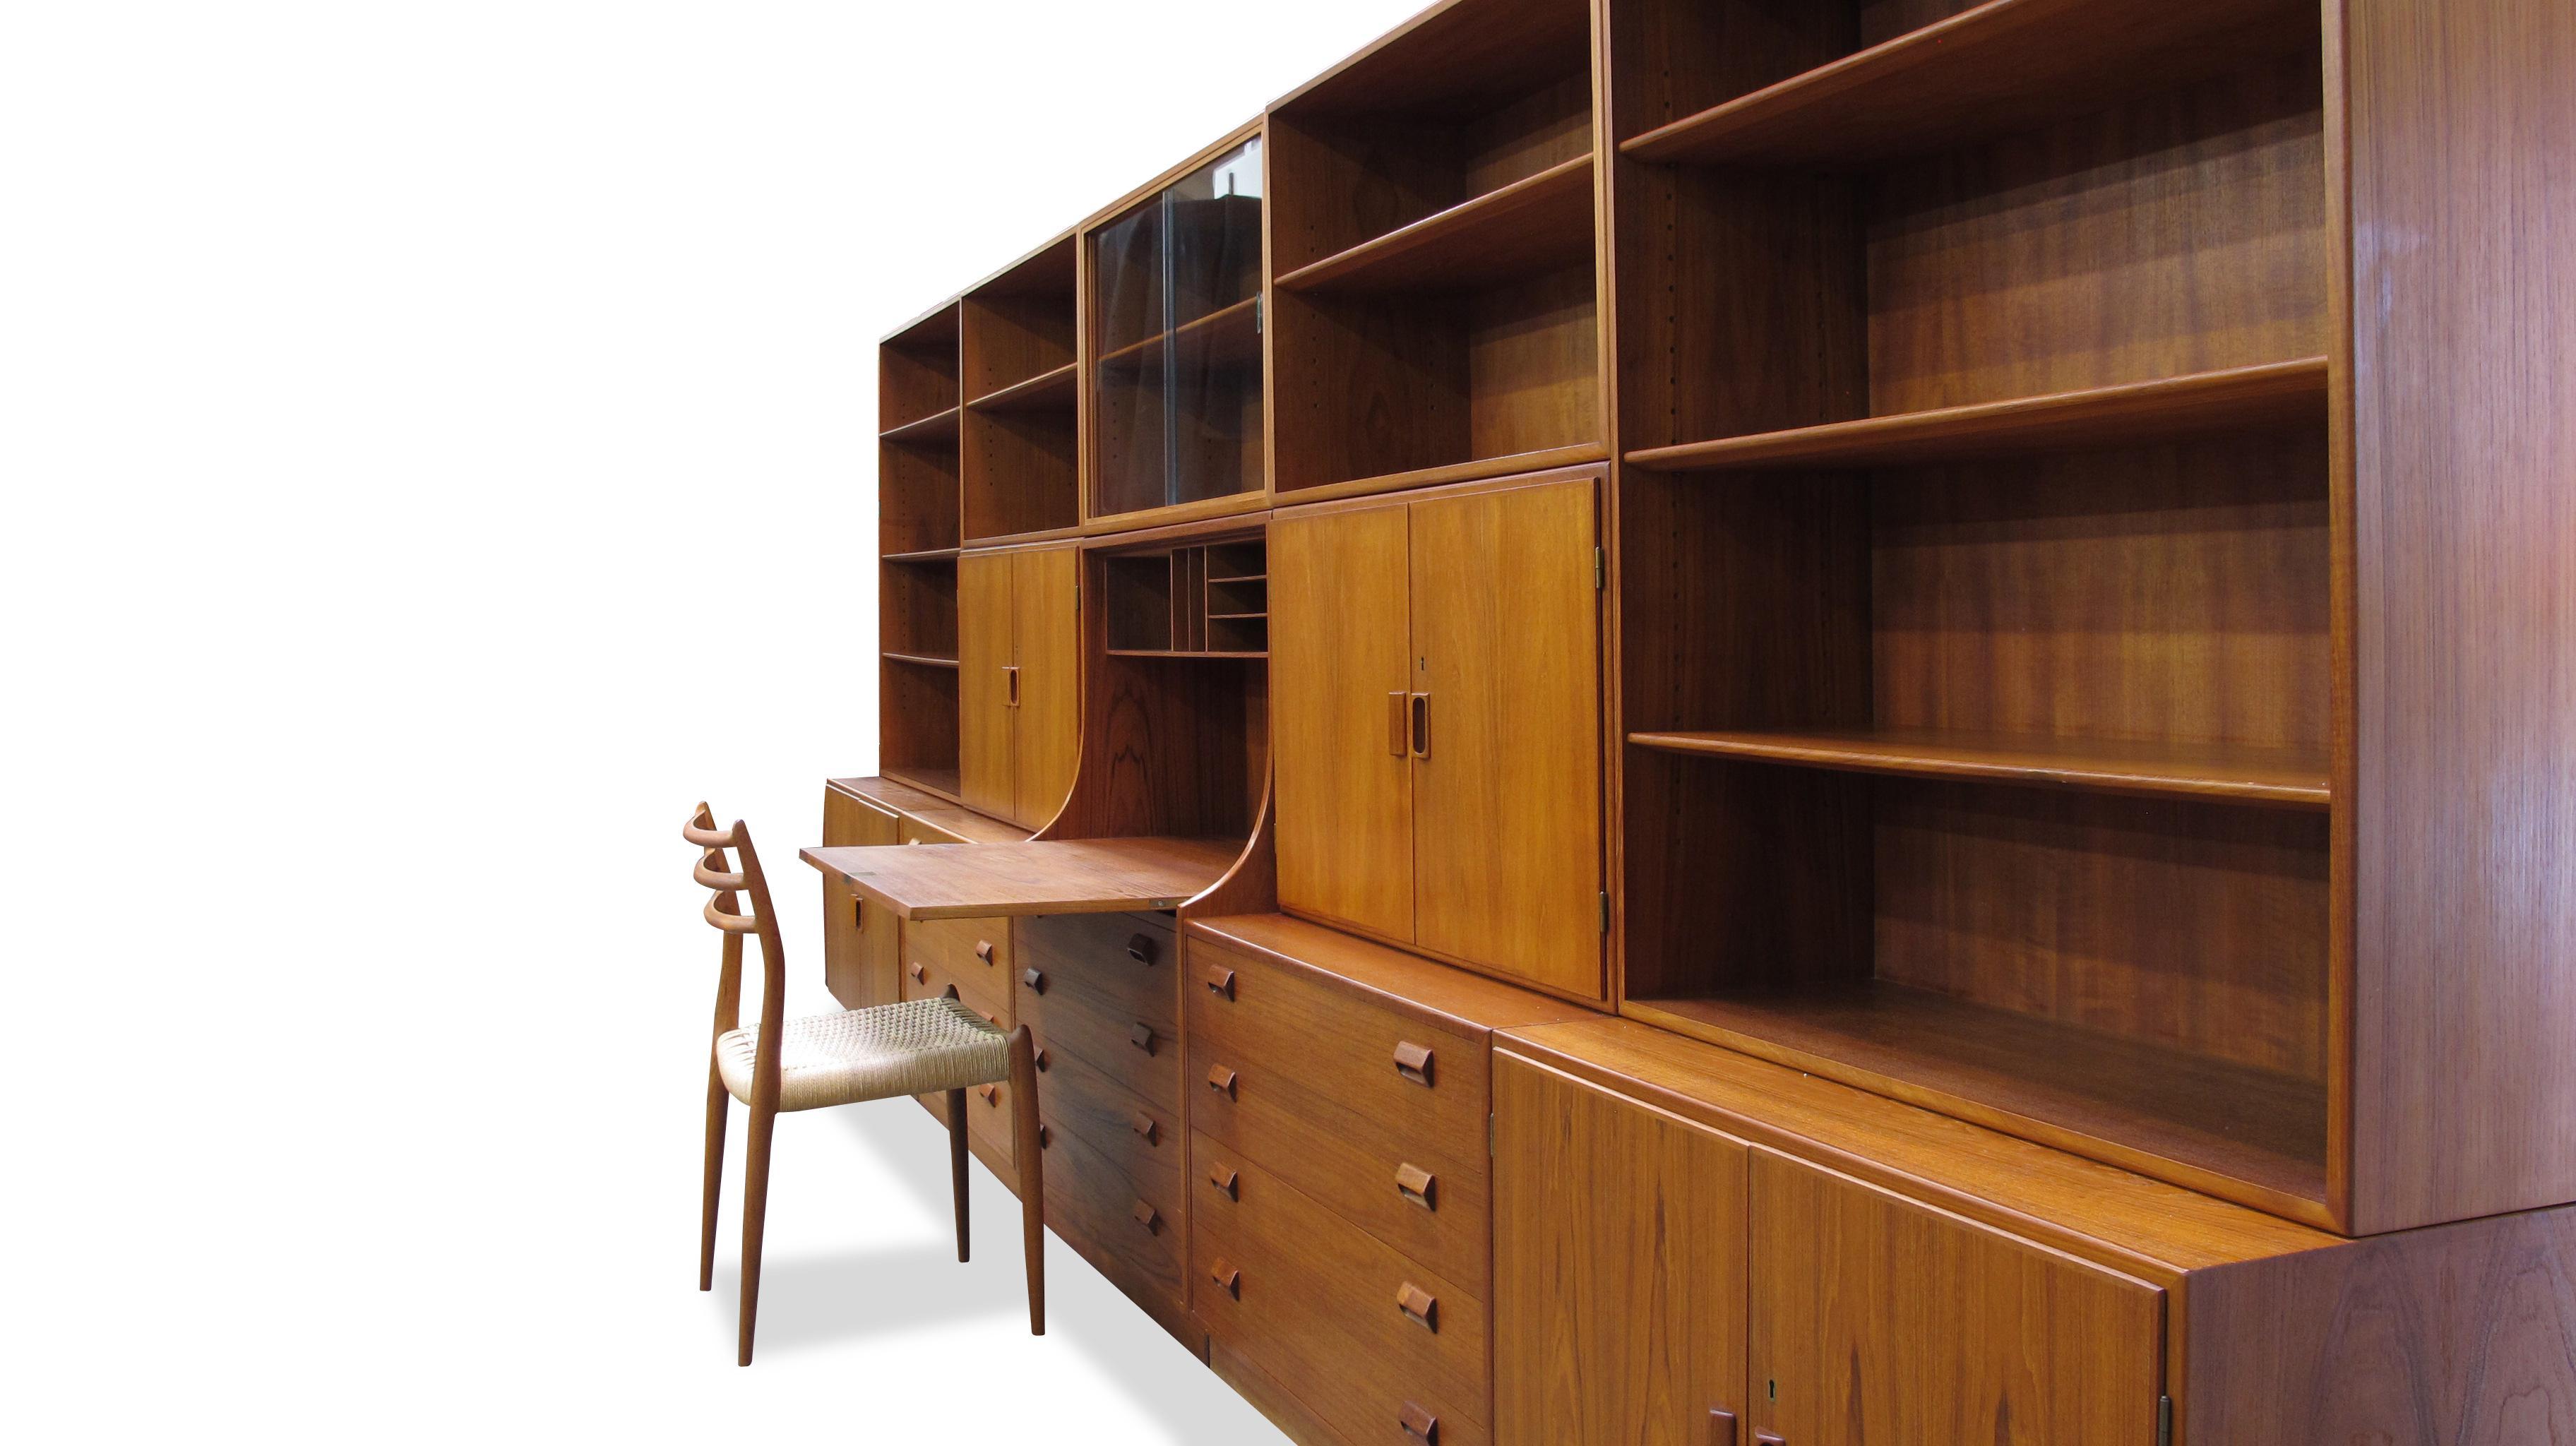 Massive teak wallunit designed by Borge Mogensen for Soborg Mobelfabik, Denmark. This fully interchangeable wall system is crafted of old-growth teak, and consists of twelve cabinets; including lower storage units and hutches. 2- lower cabinets with